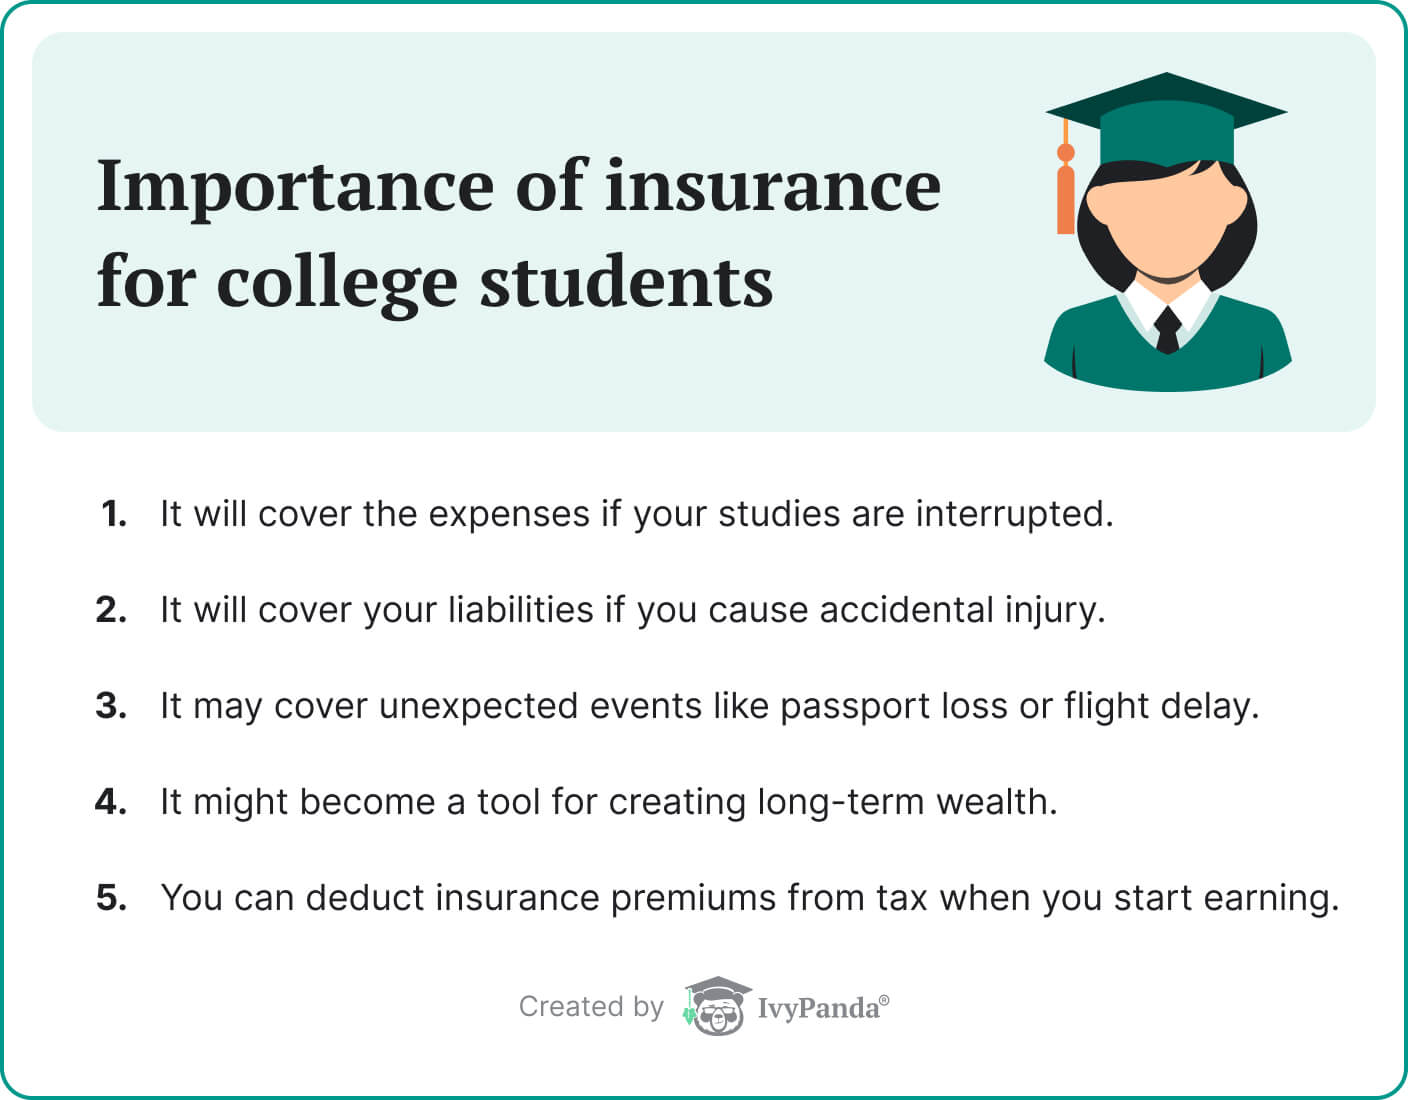 Importance of insurance for college students.